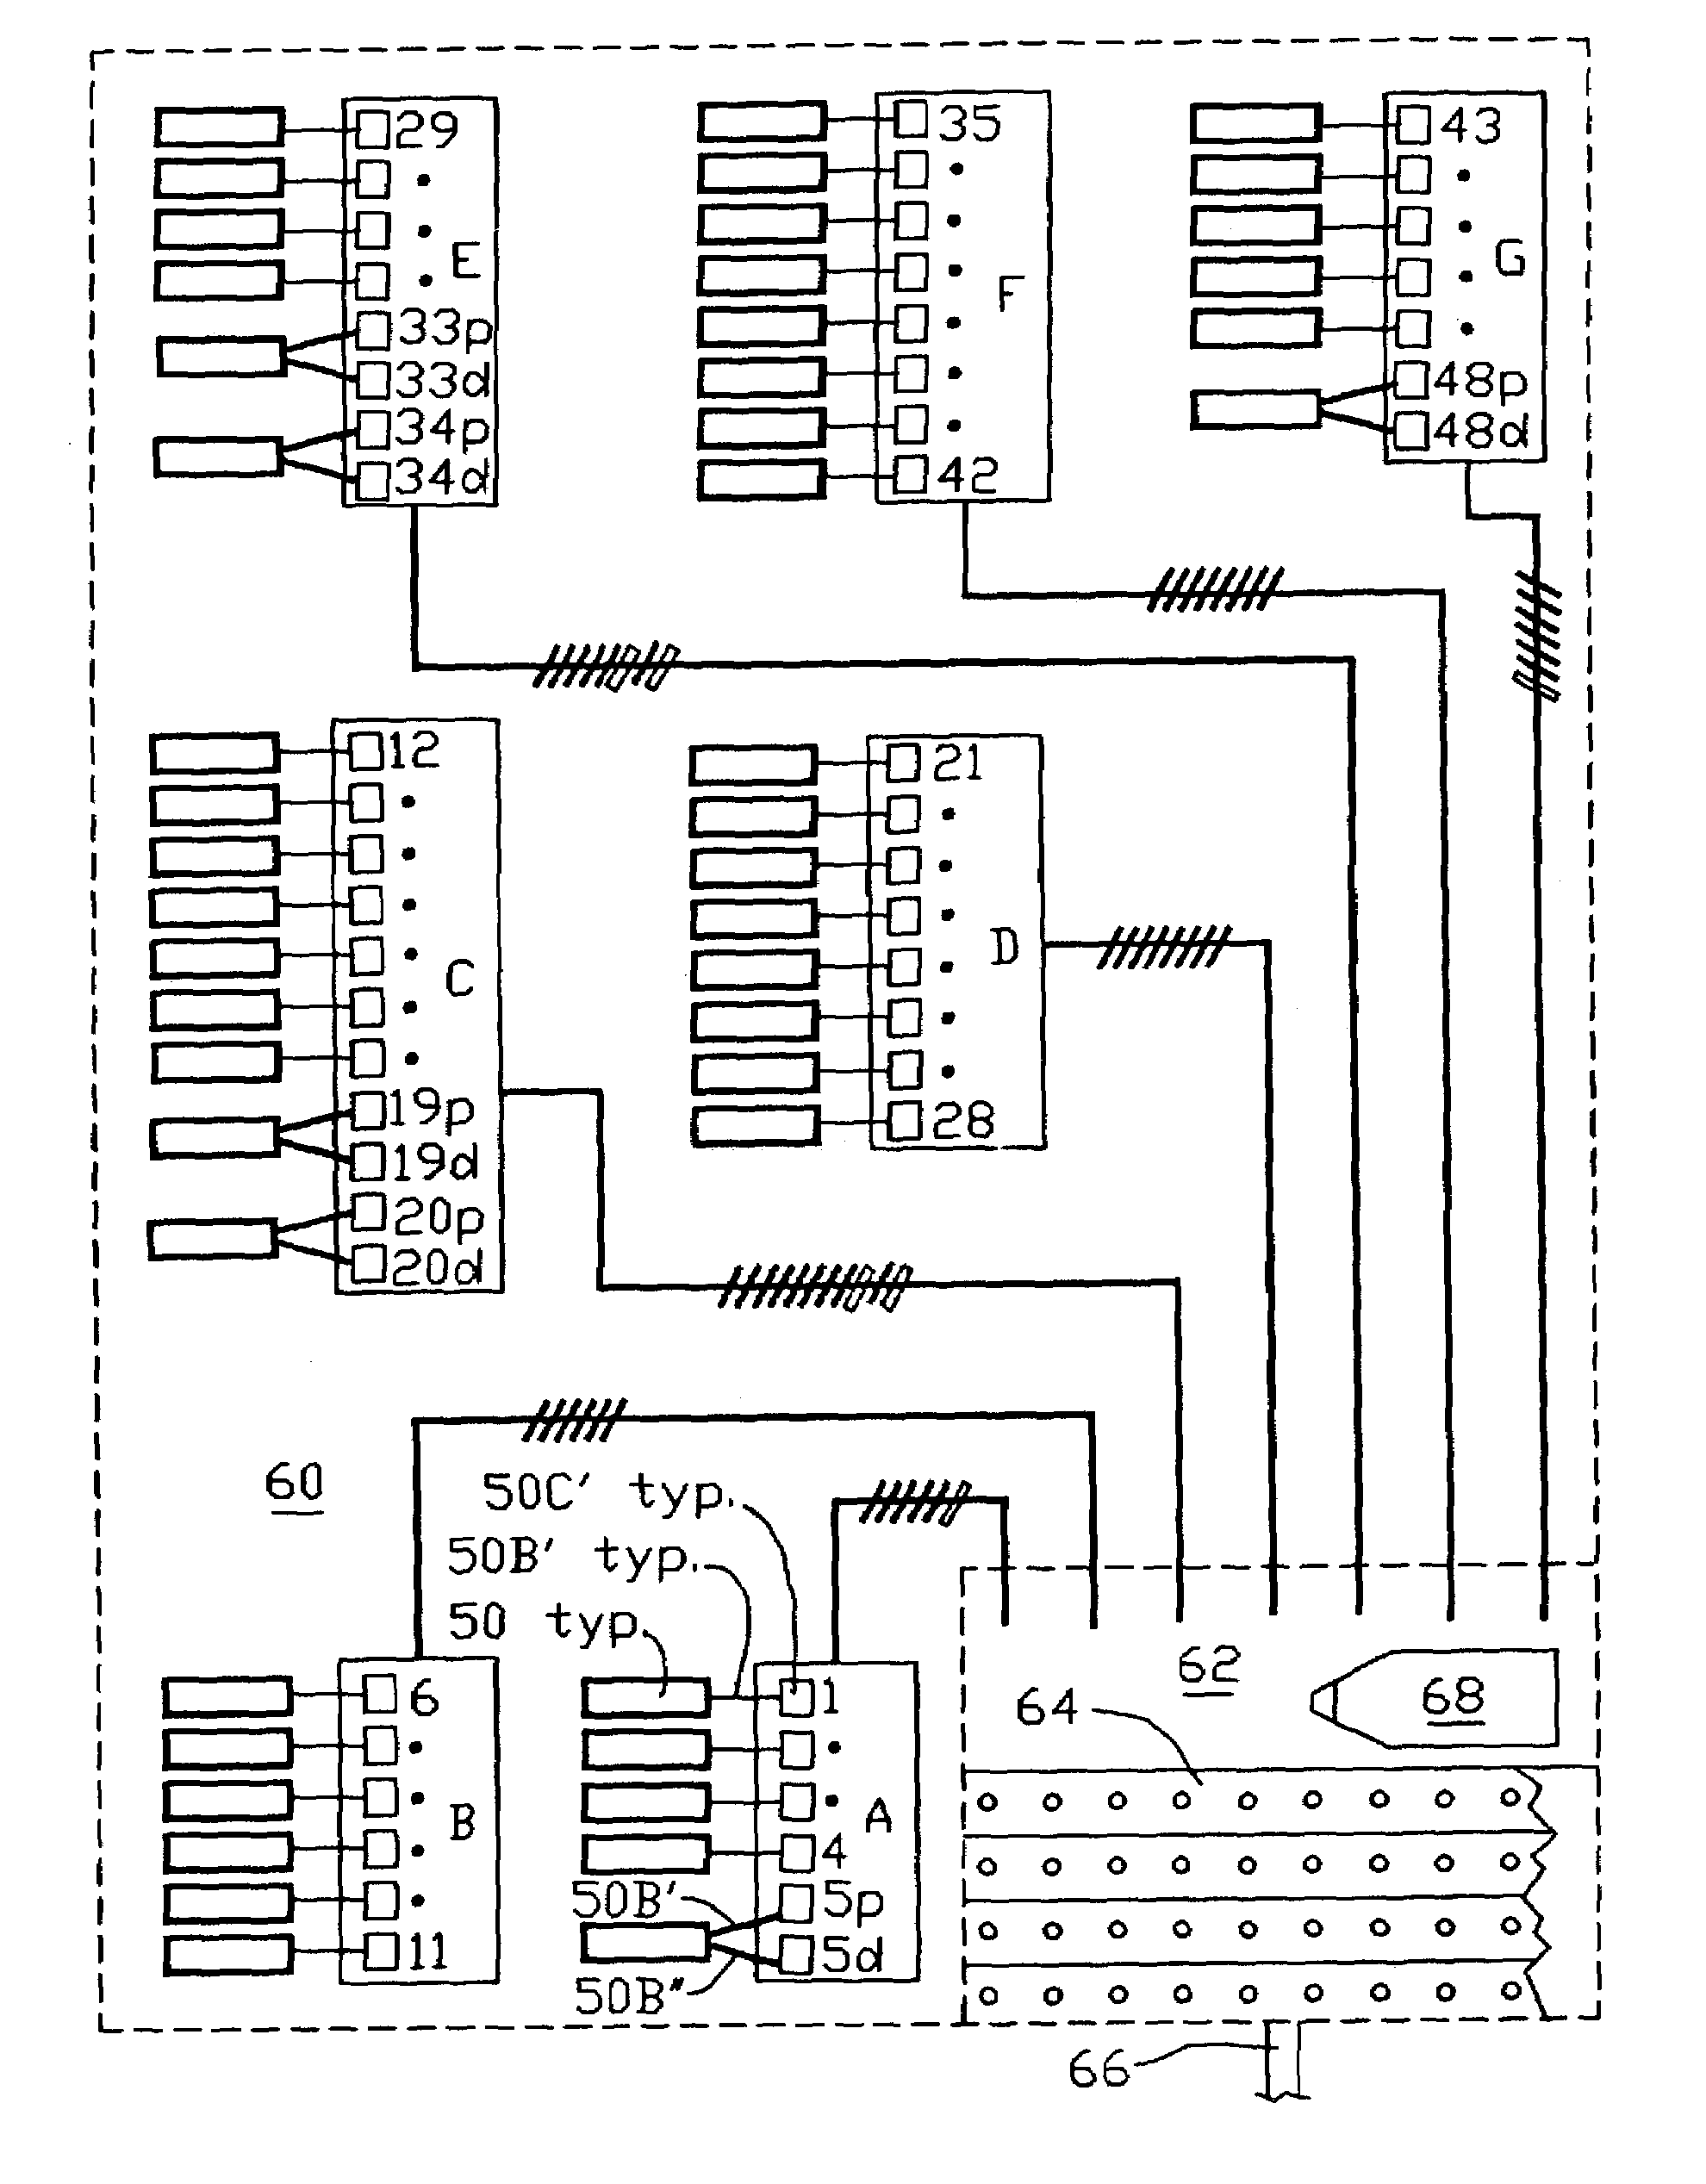 Simultaneous tracing of multiple phone/data cables